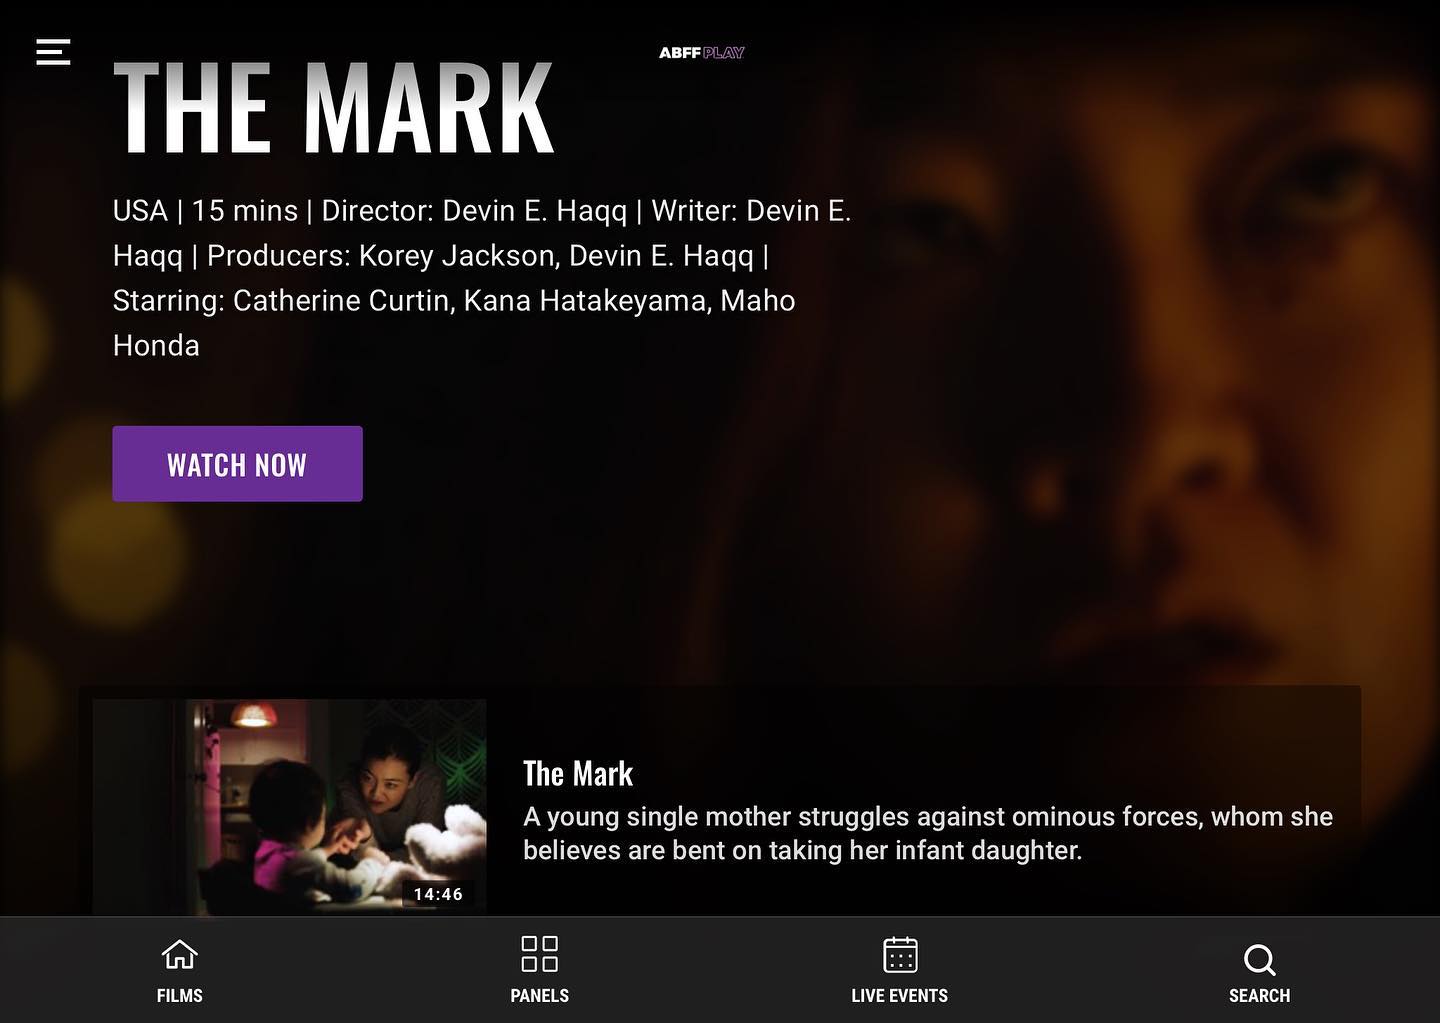 Vote for The Mark at ABFF ’20